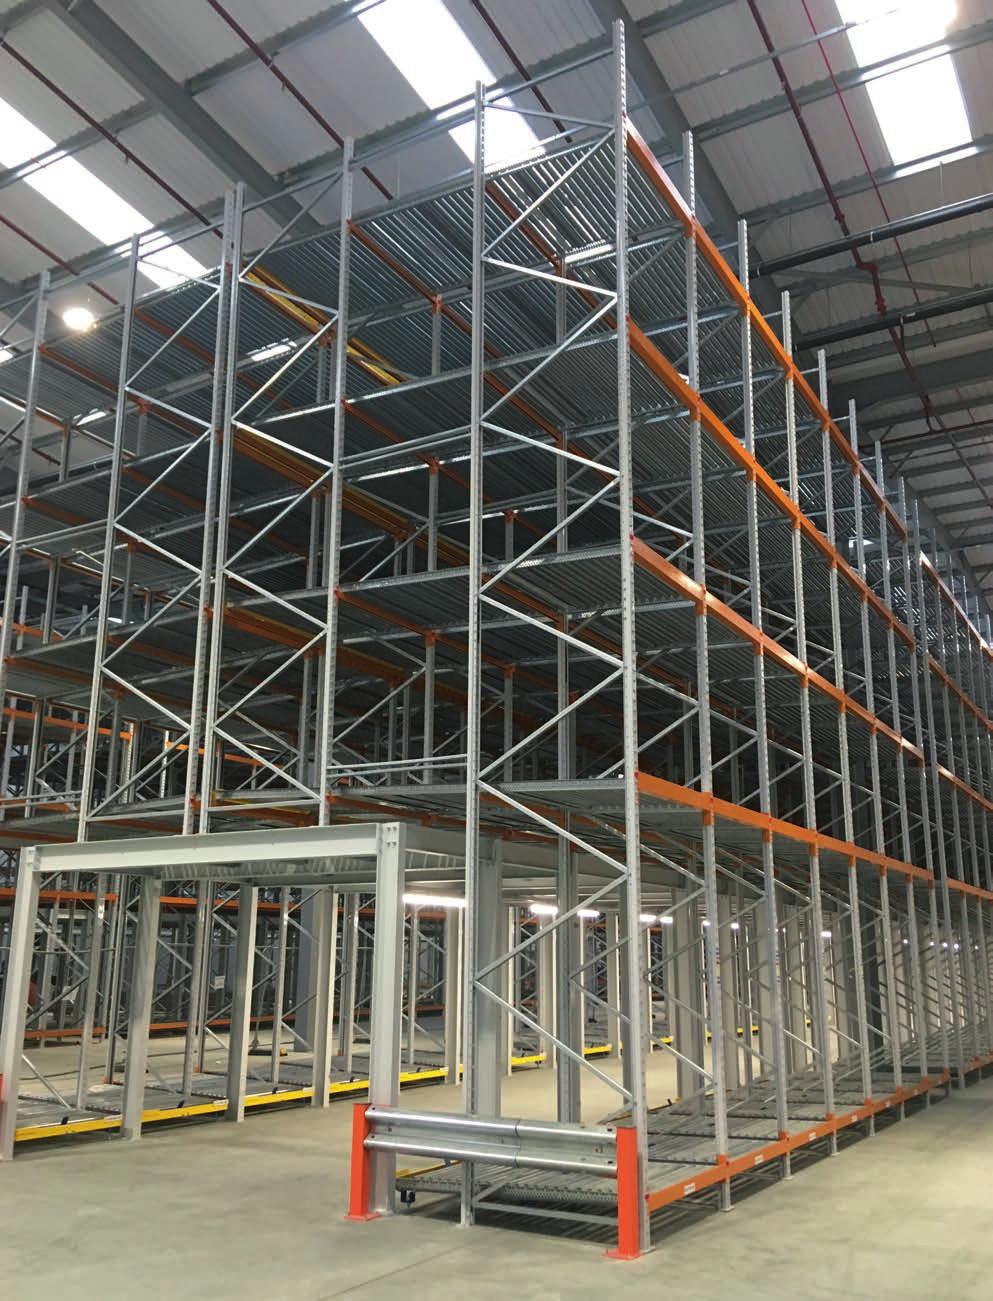 Push-Back Racking - First In - Last Out (FILO) Pallets are loaded and unloaded from the same aisle, reducing truck travel distances and